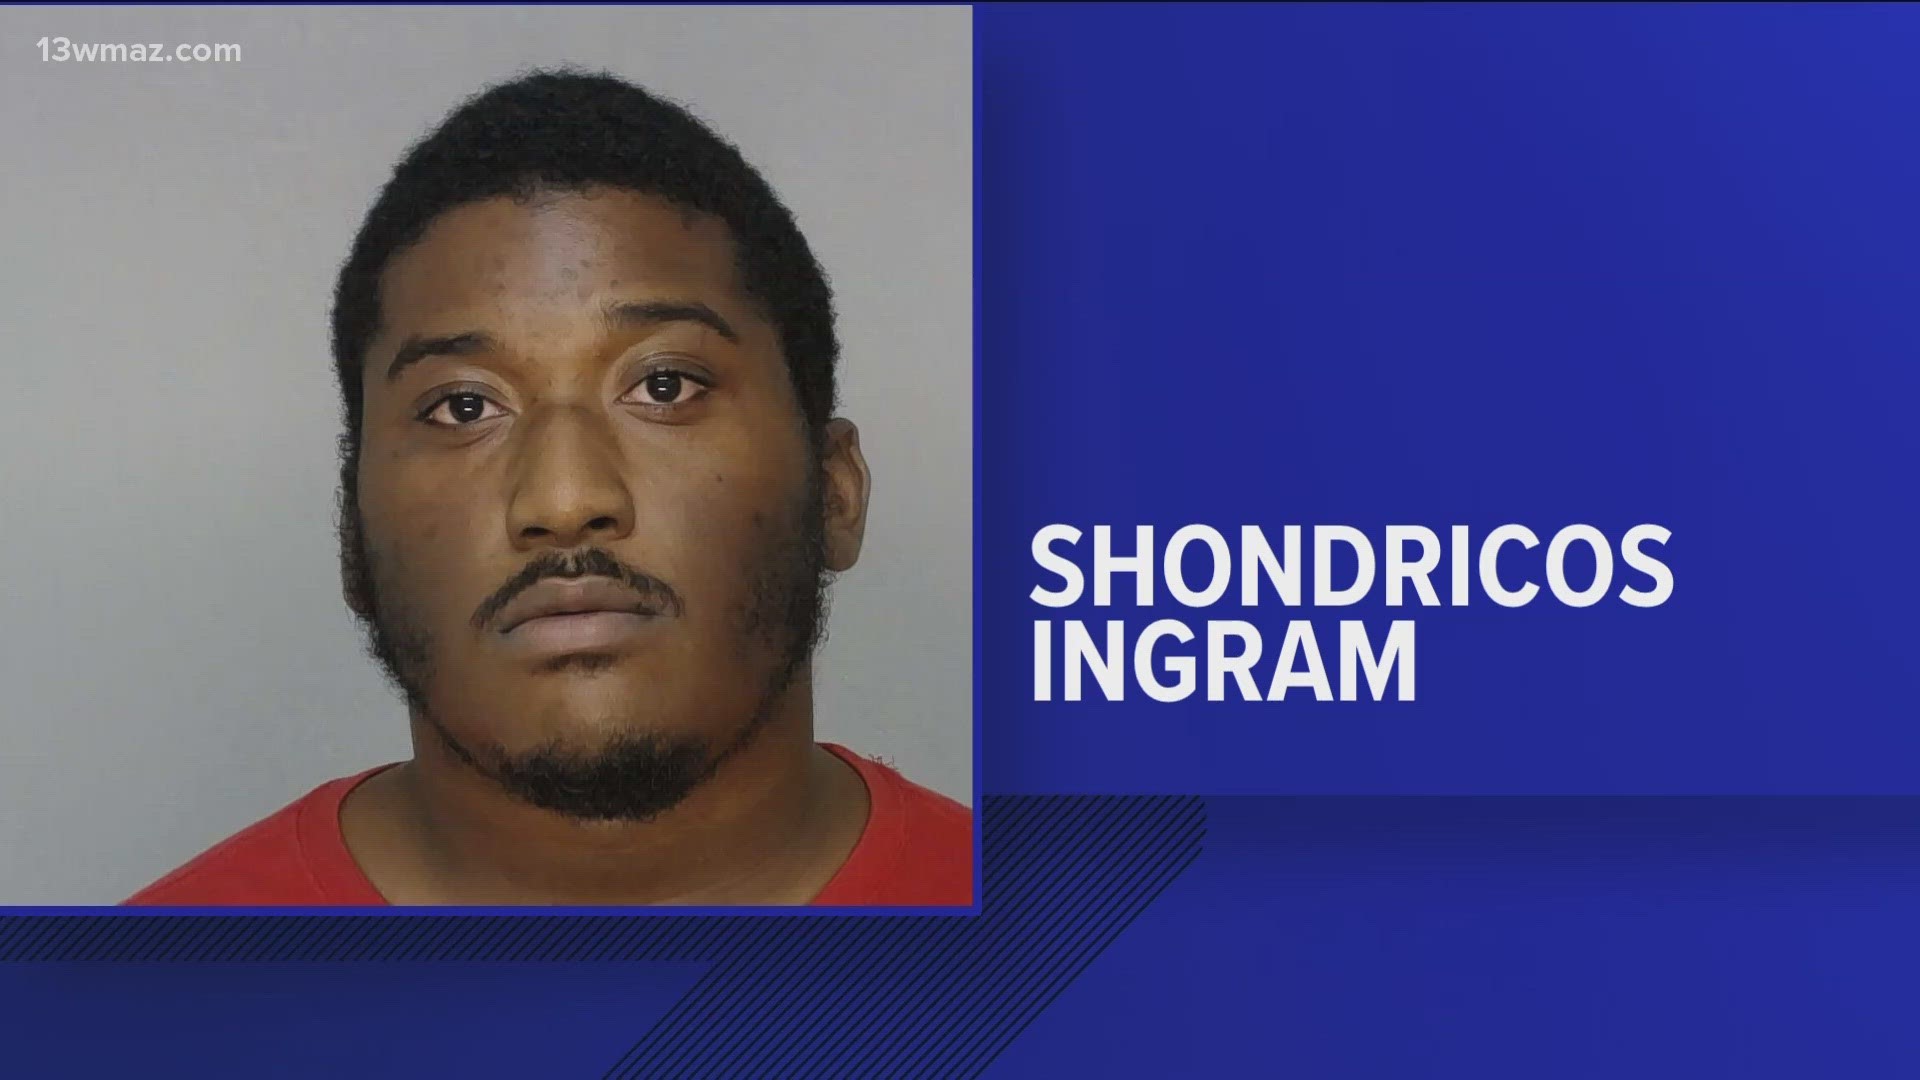 25-year-old man charged in July 2022 murder of woman, 24 13wmaz